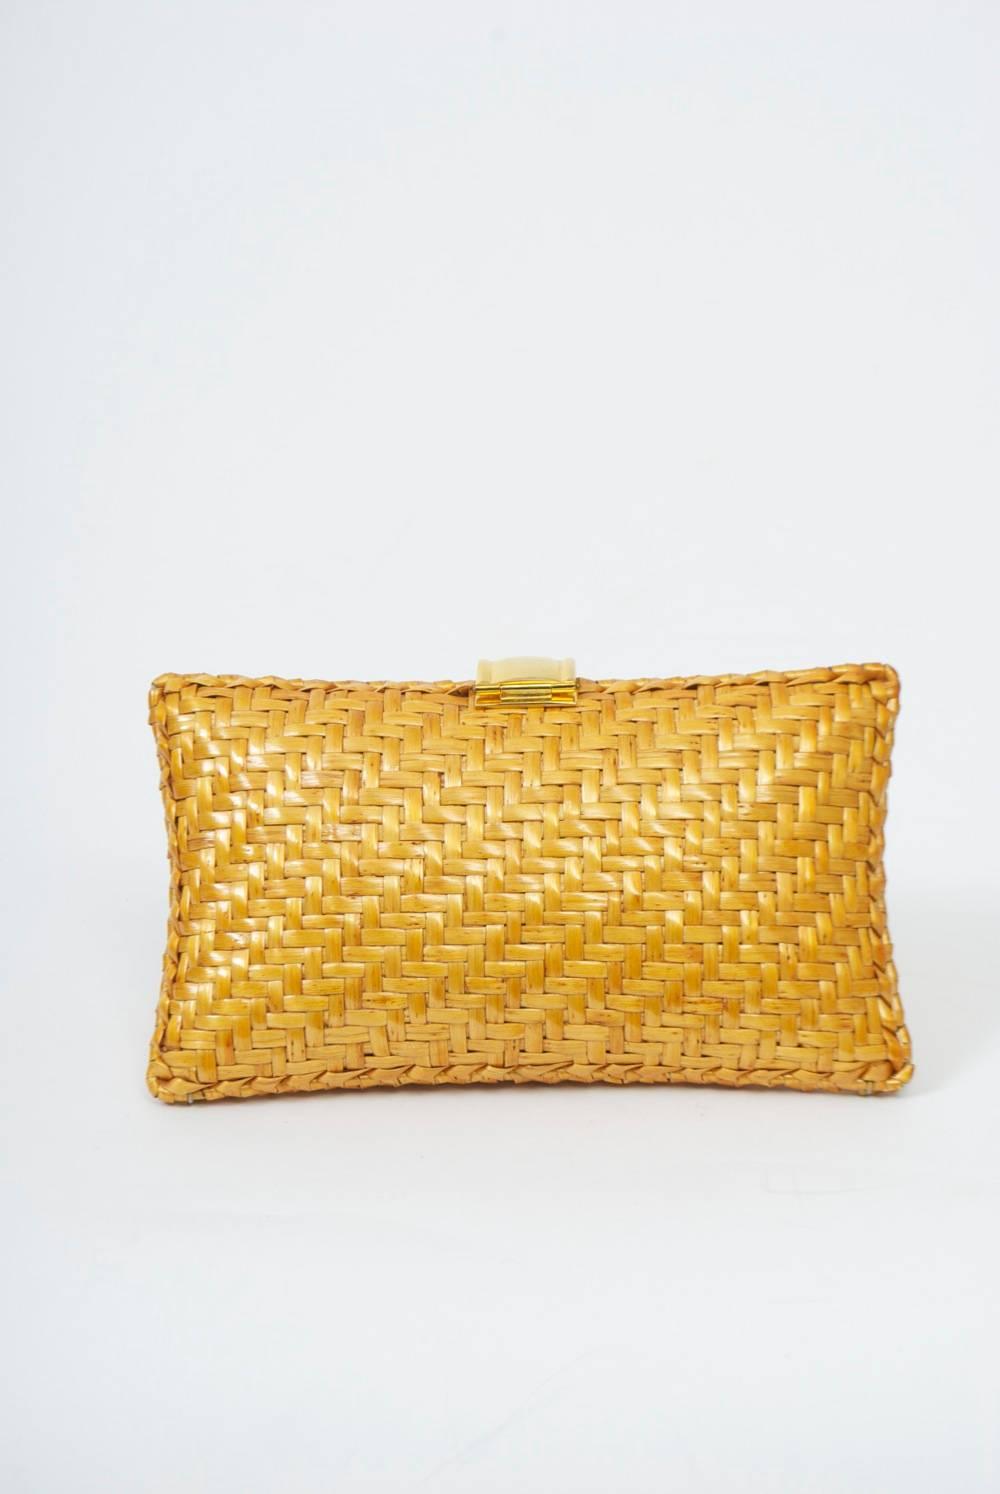 Sleek woven straw clutch with simple gold metal tongue clasp. Interior has a slit side pocket. 